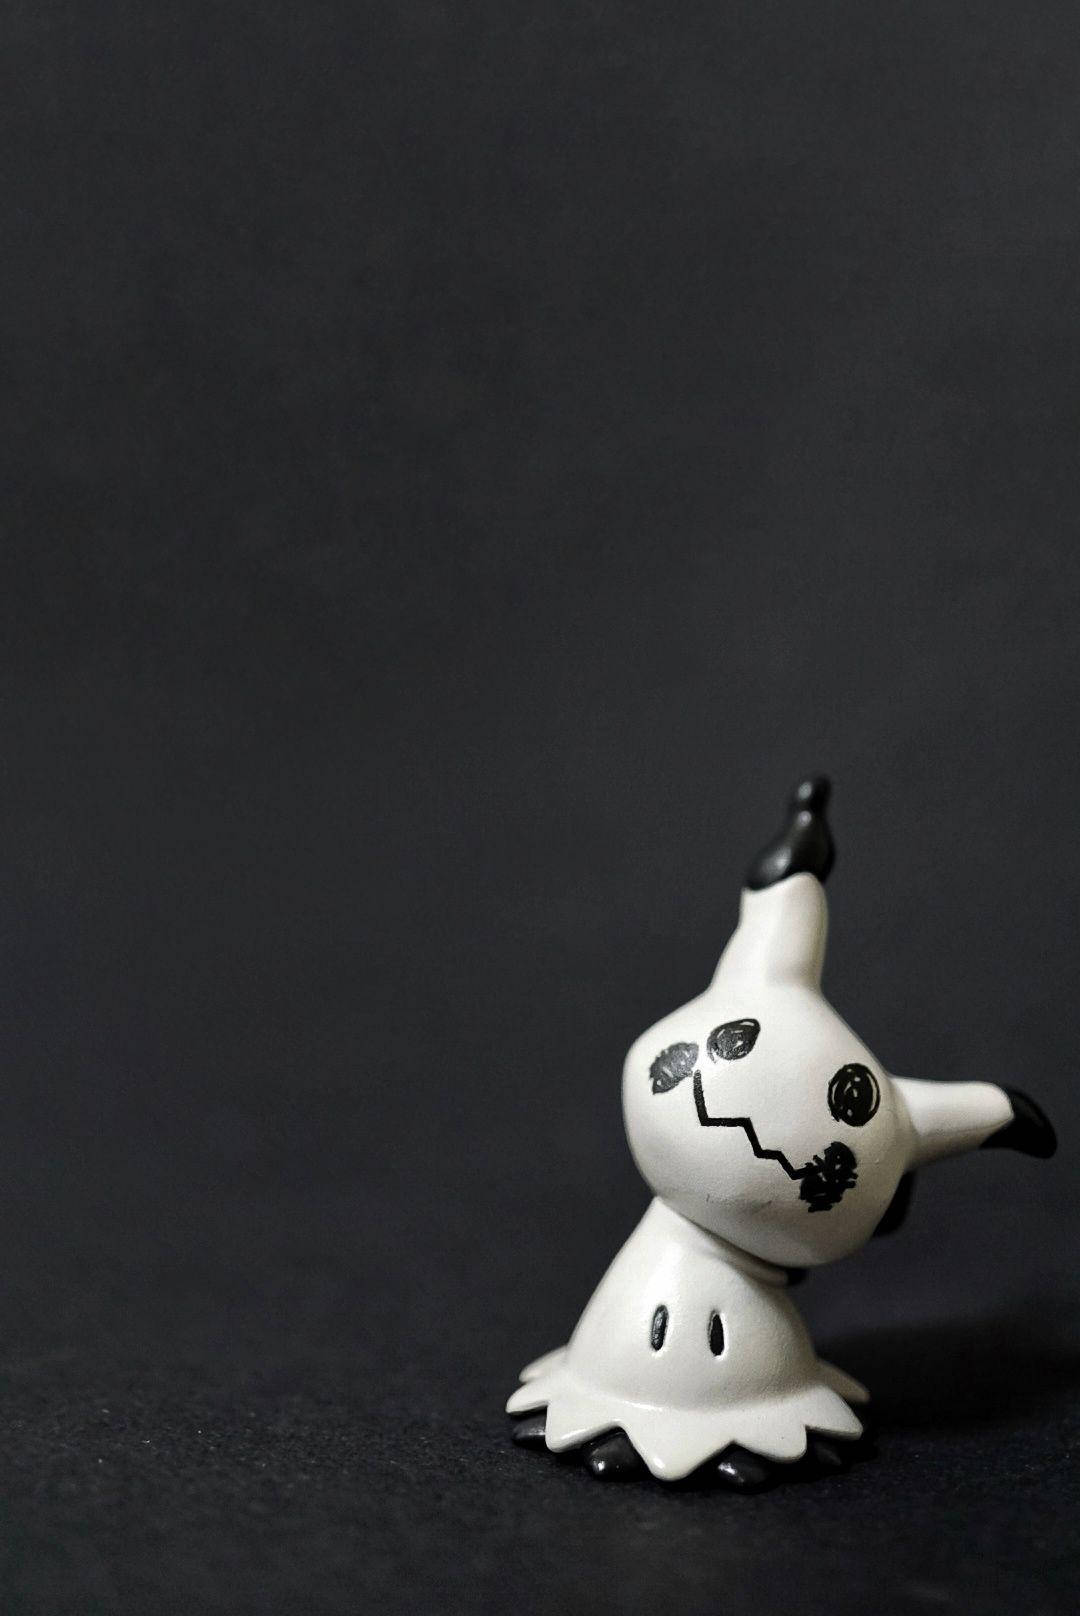 A Small Figurine Of A Ghost Sitting On A Black Surface